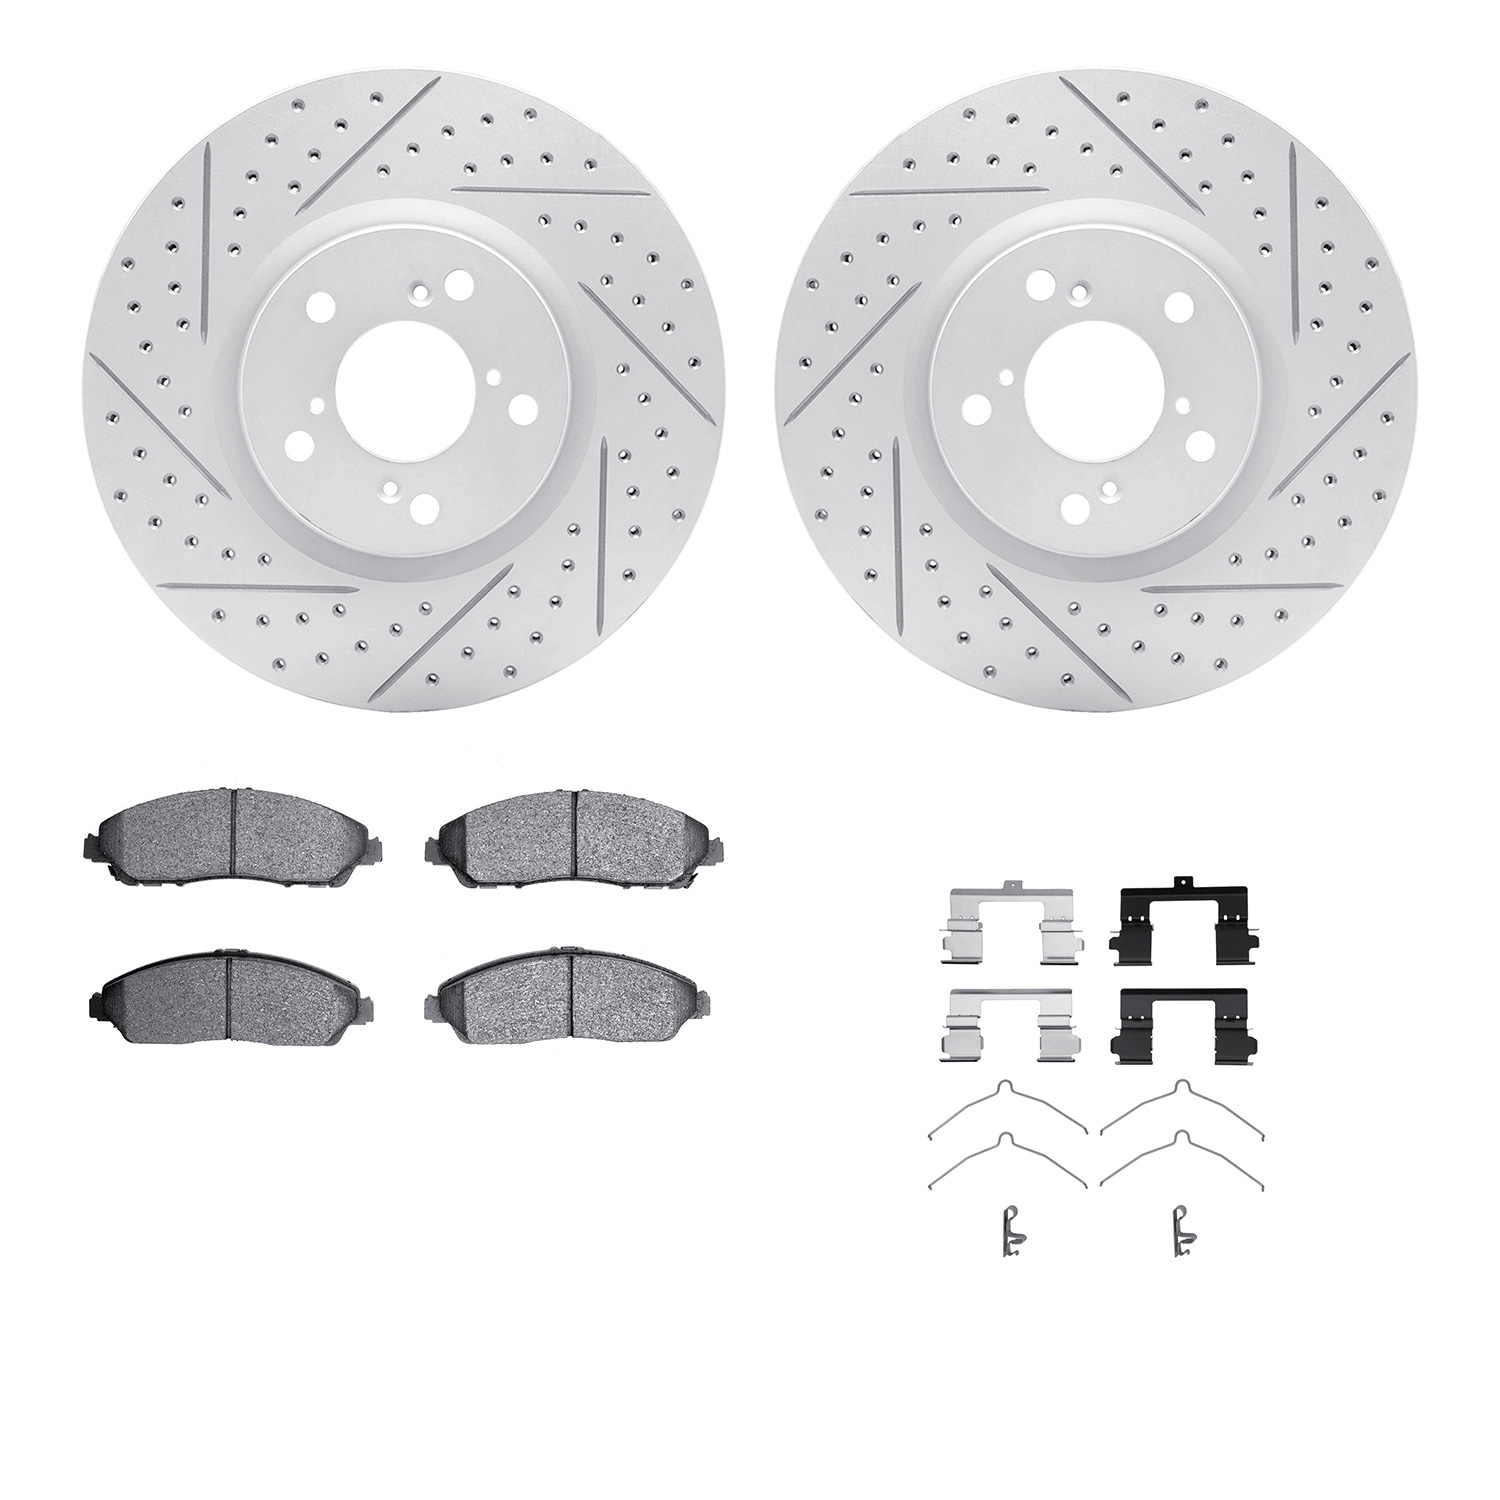 2512-59100 Geoperformance Drilled/Slotted Rotors w/5000 Advanced Brake Pads Kit & Hardware, 2007-2015 Acura/Honda, Position: Fro